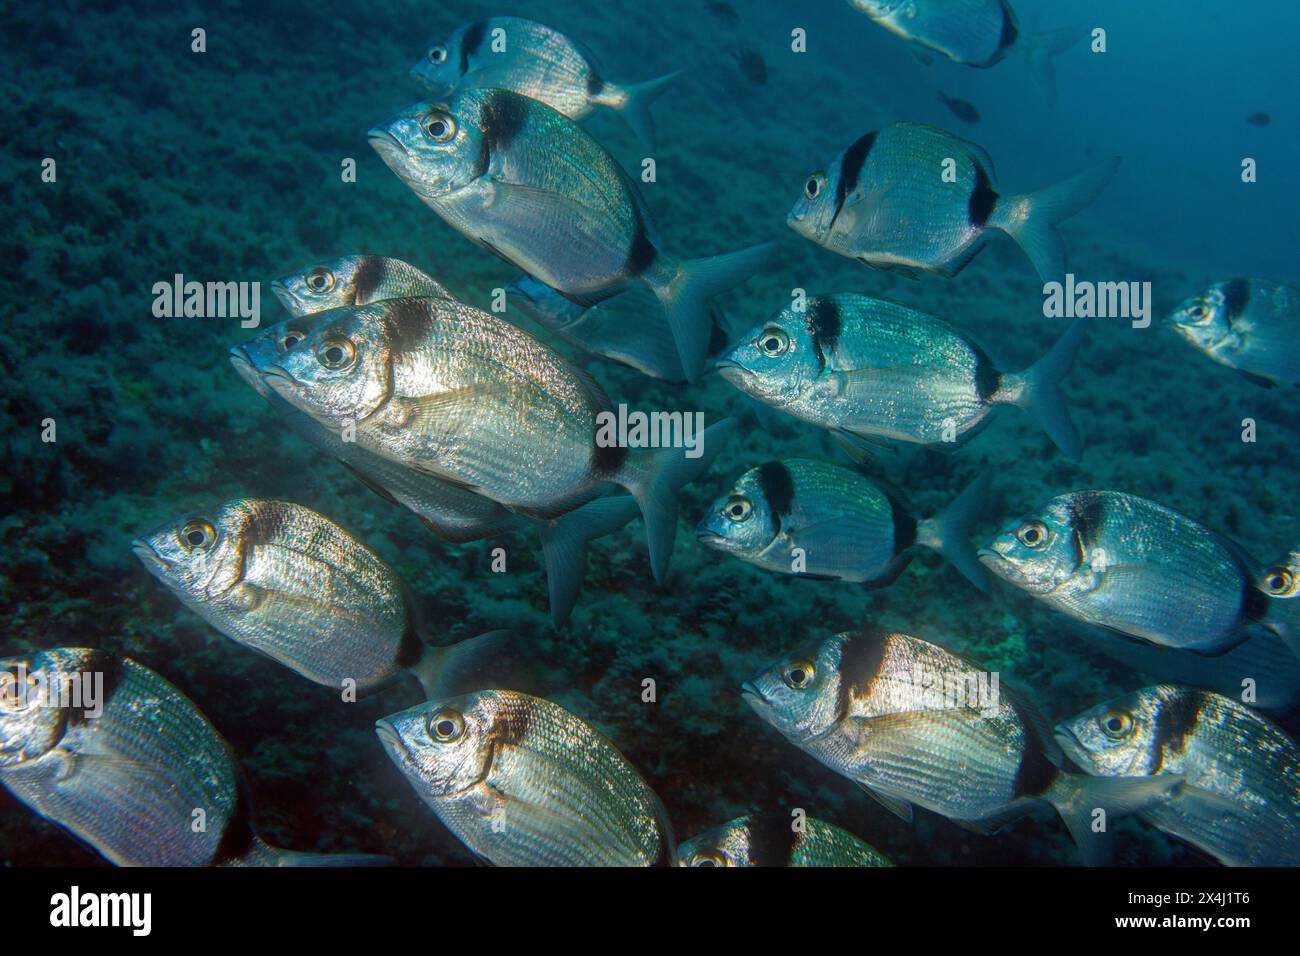 Group of Common two-banded seabream (Diplodus vulgaris) in the open sea wild, food fish, Mediterranean Sea Stock Photo